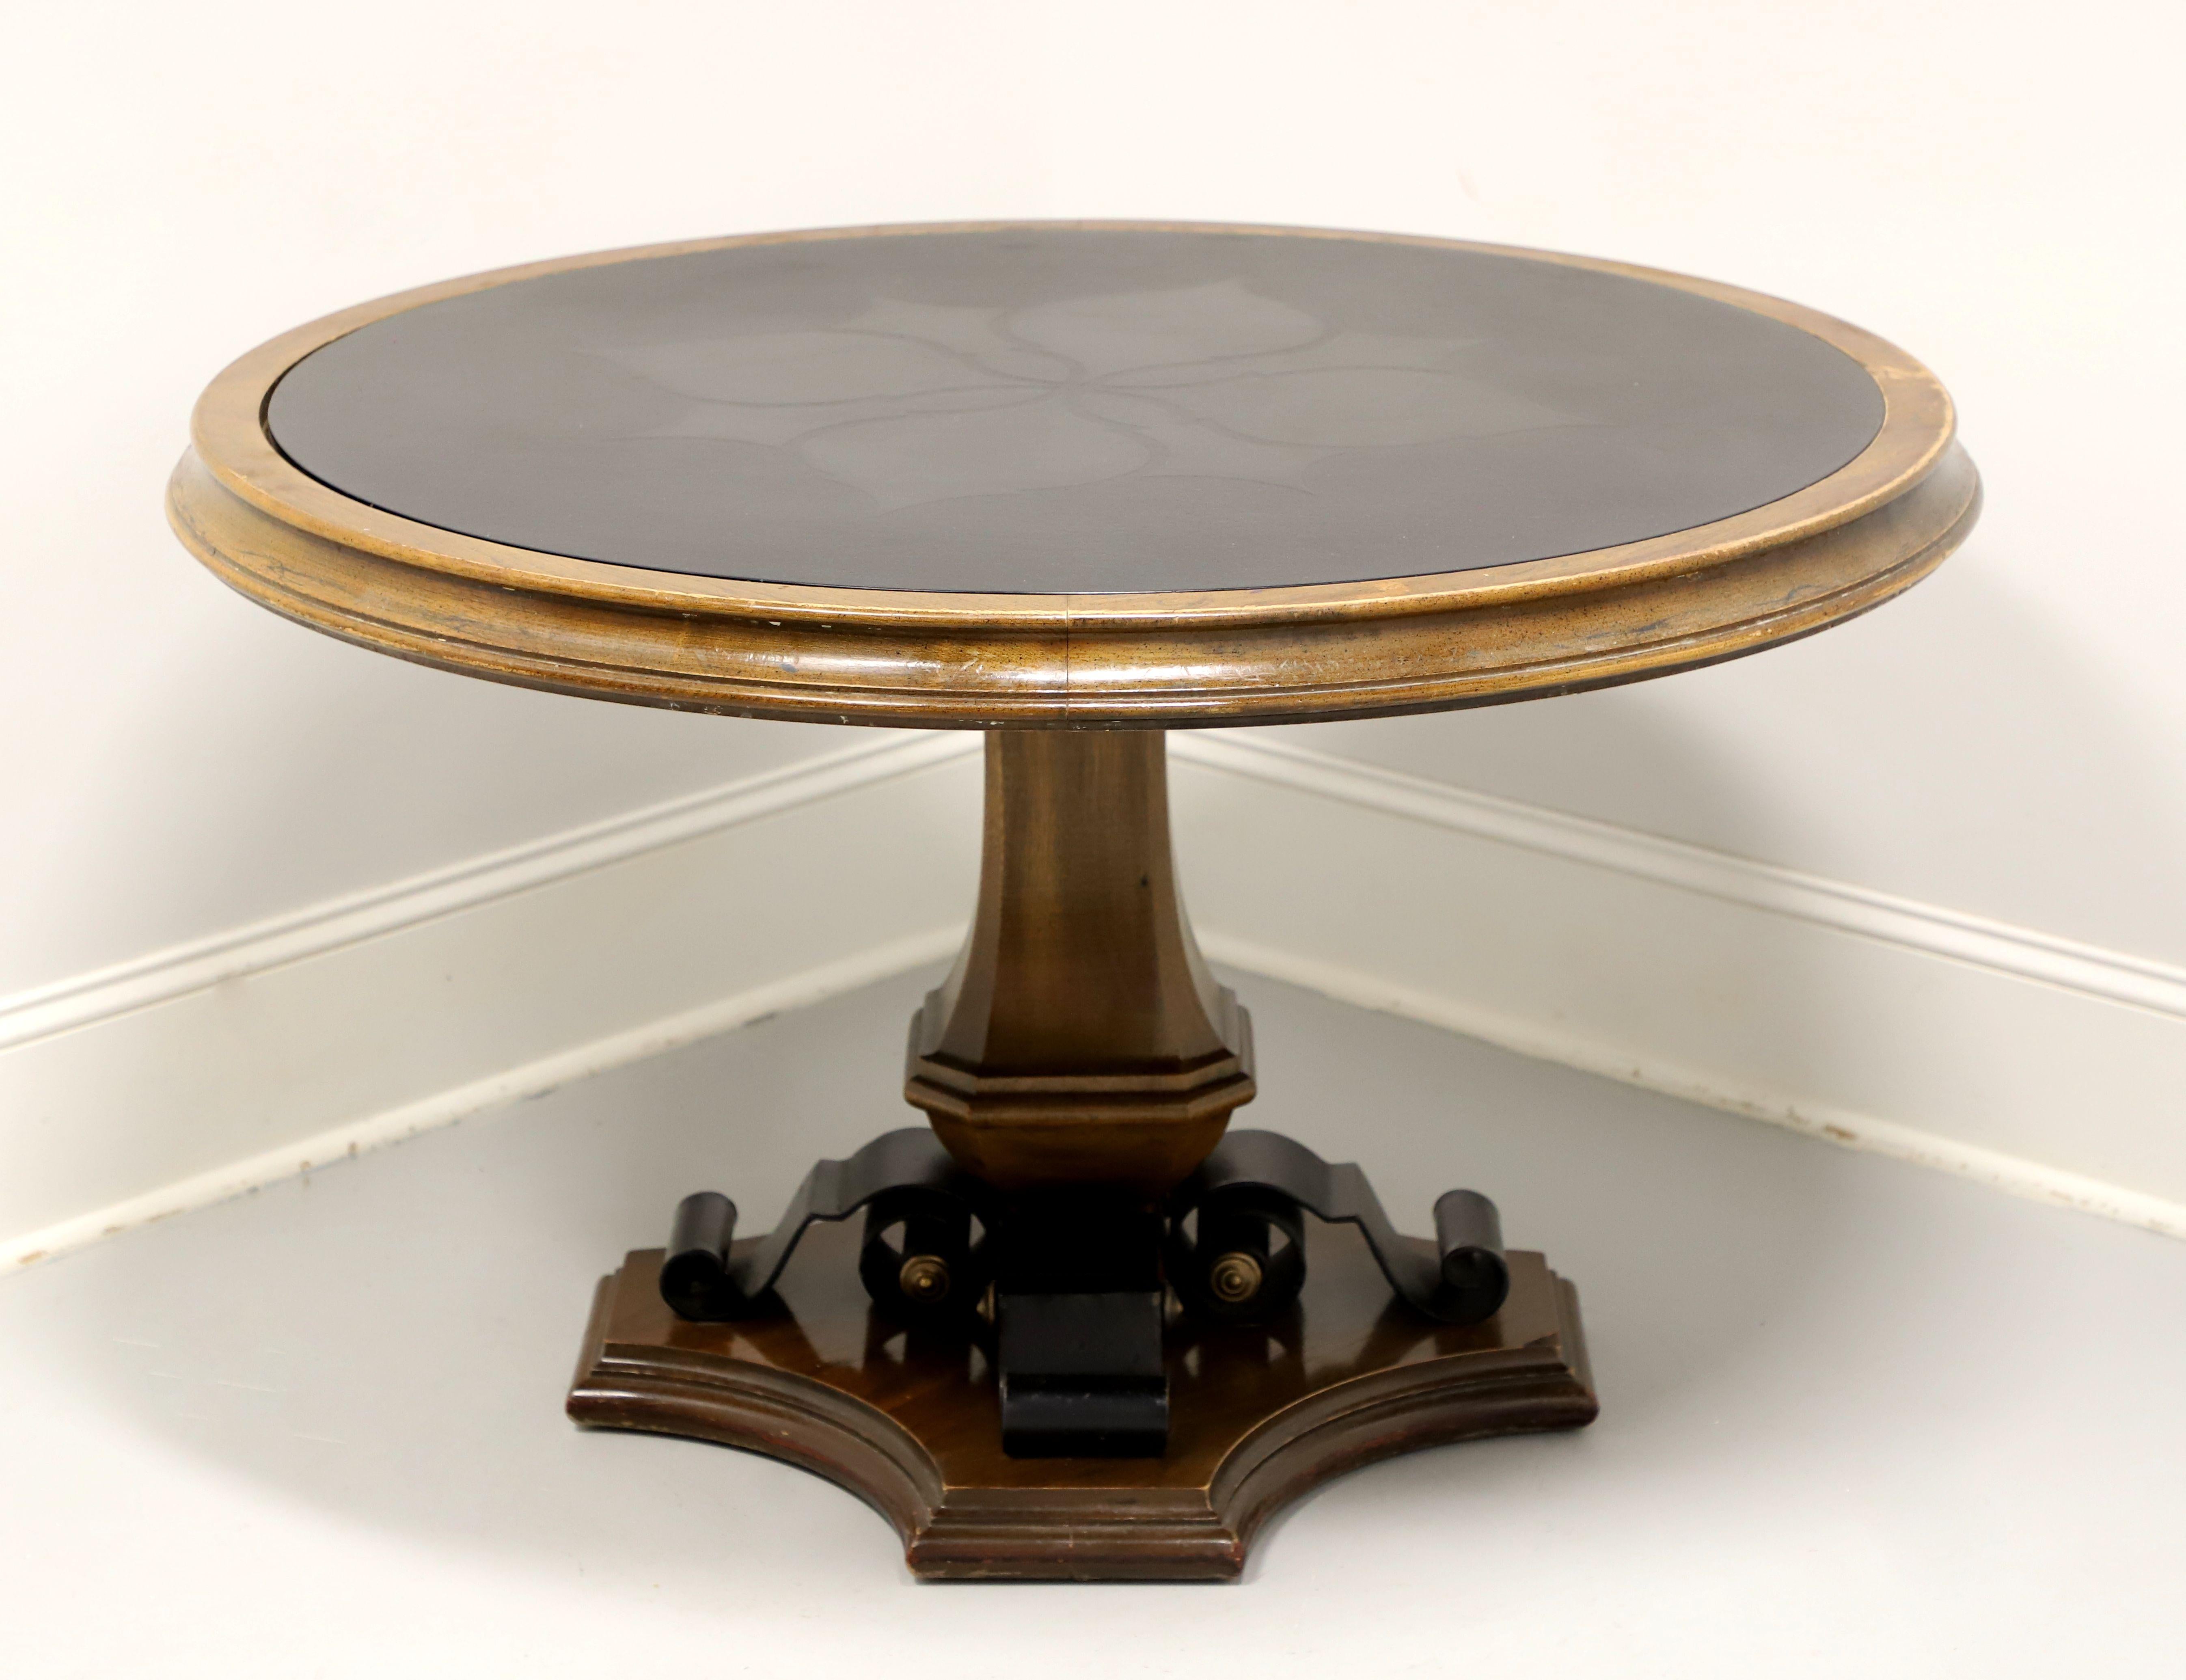 A Spanish style round game table by Gordon's Furniture, of Johnson City, Tennessee, USA. Walnut with an inlaid black composite material top, top has a decorative design to the center & a smooth edge, bevel edge to the apron, carved four-sided